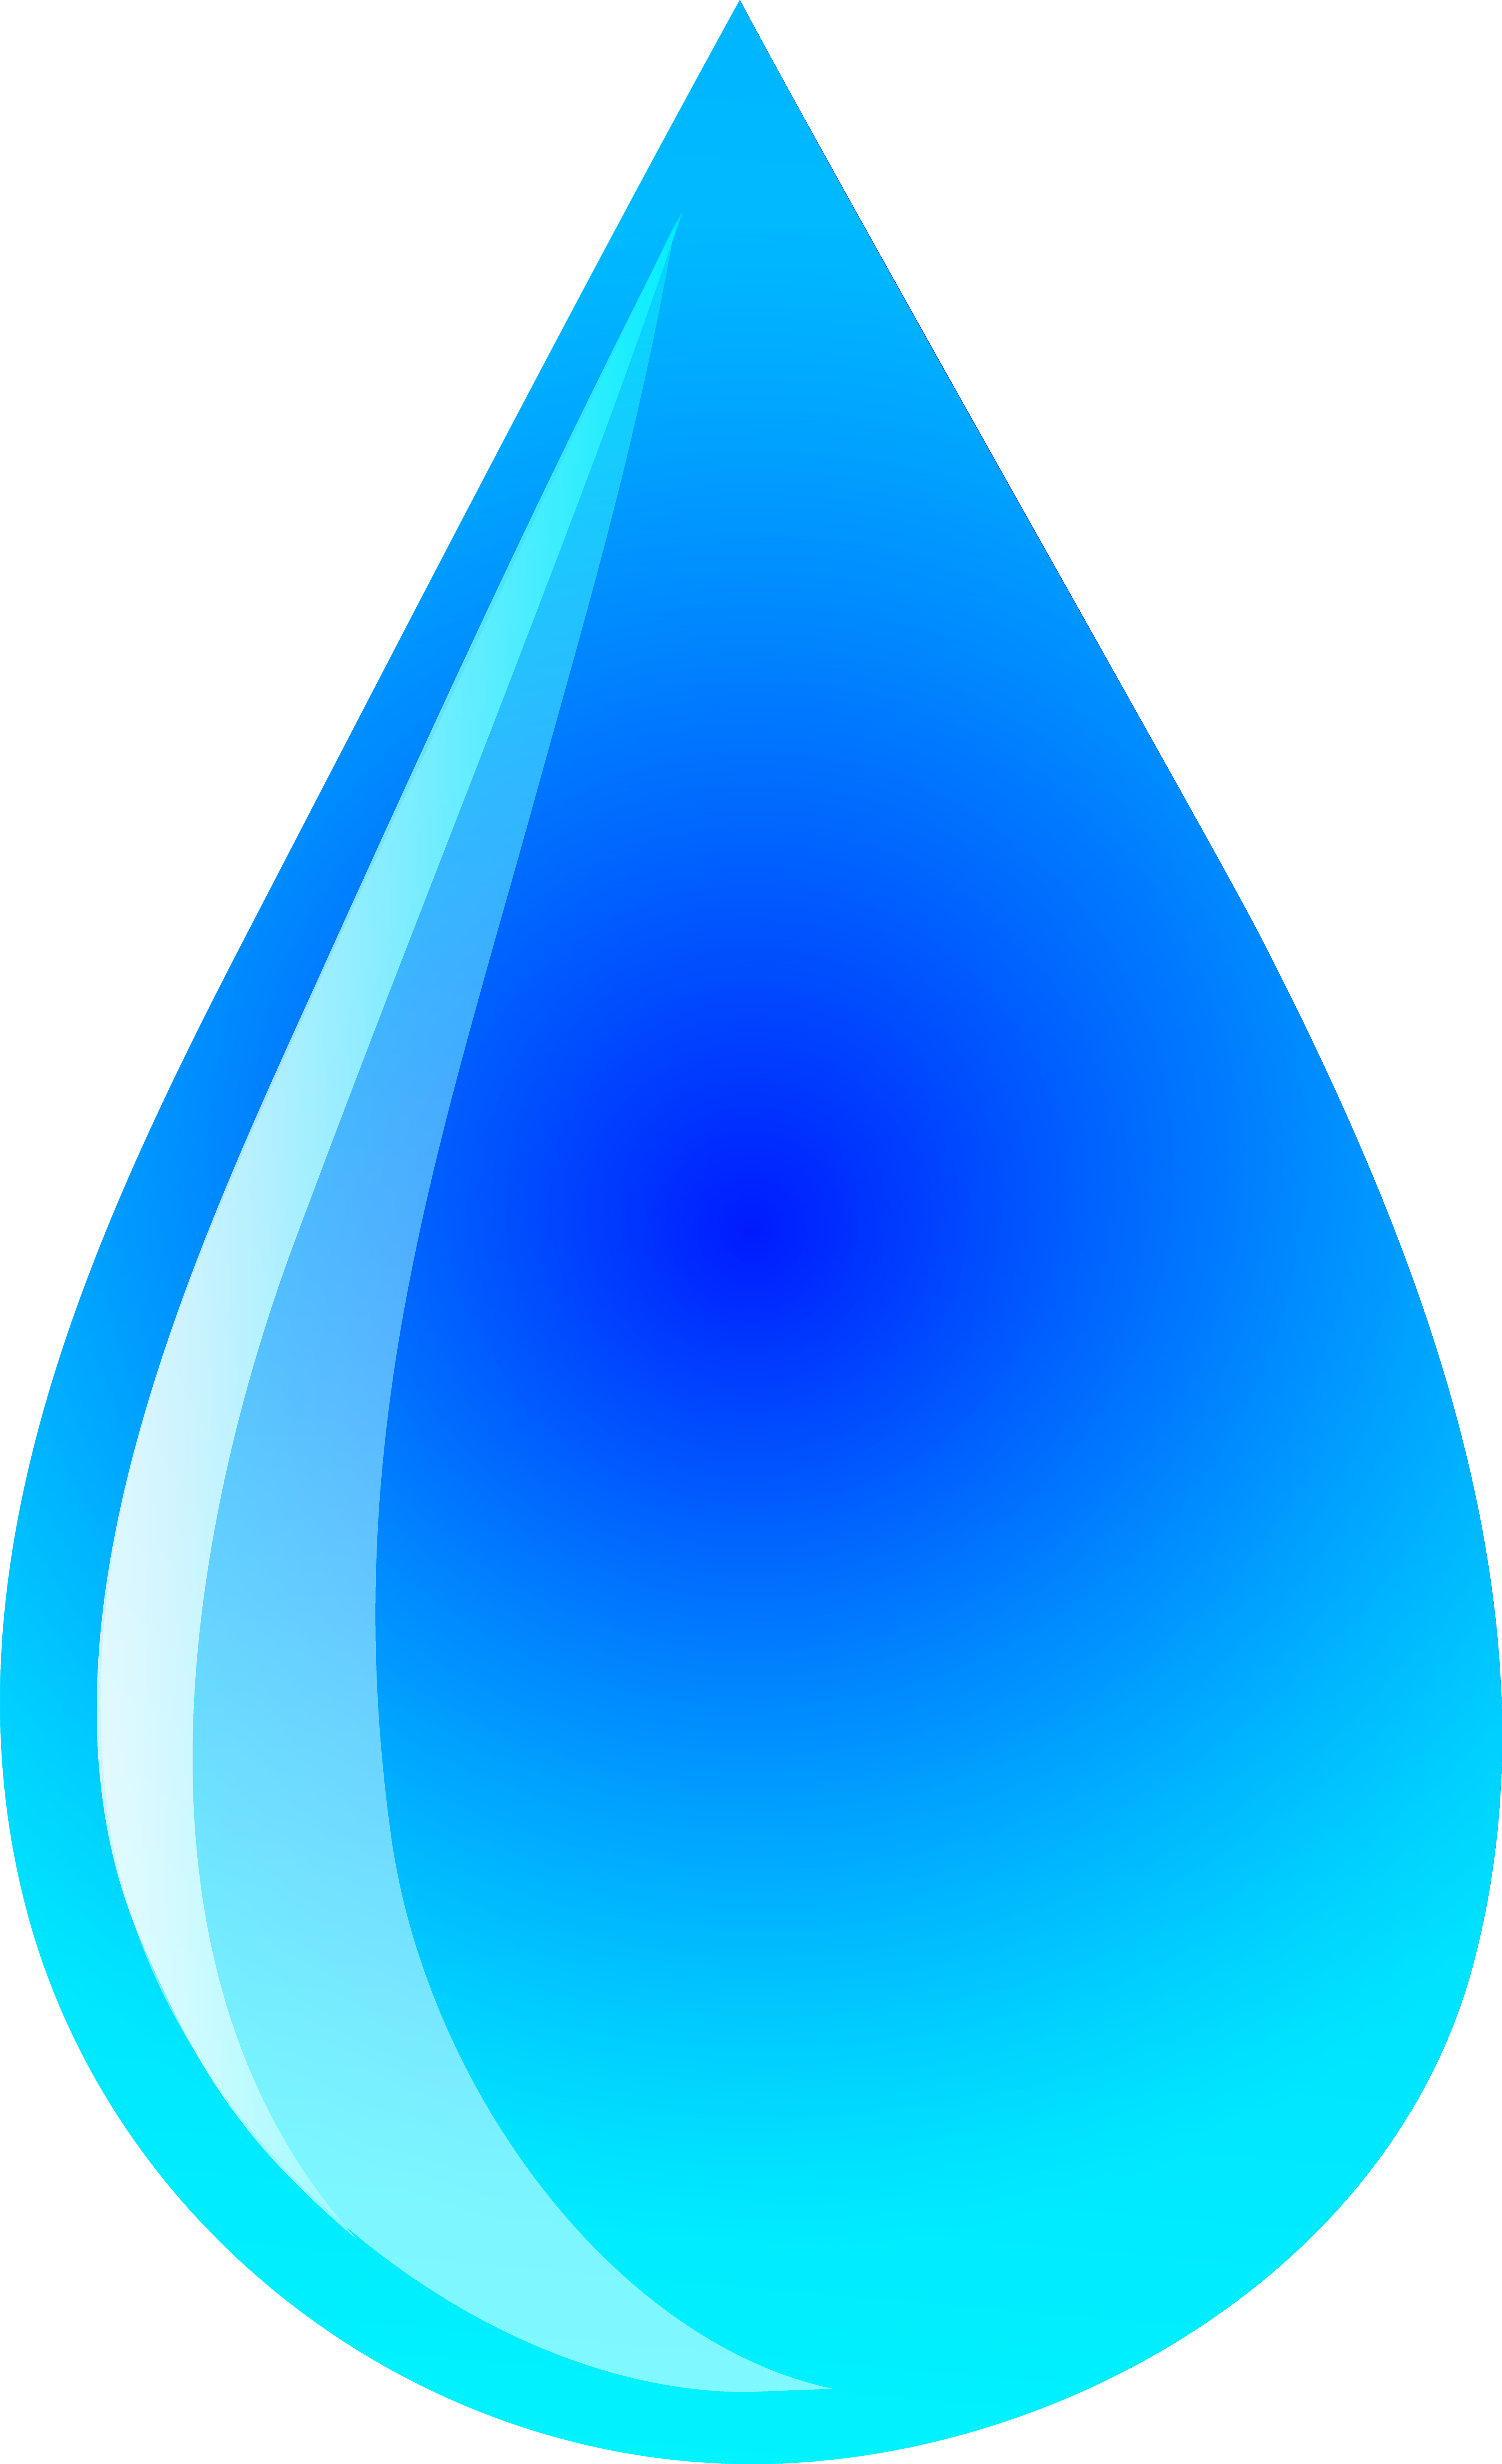 Water Droplets Clipart Images  Pictures - Becuo